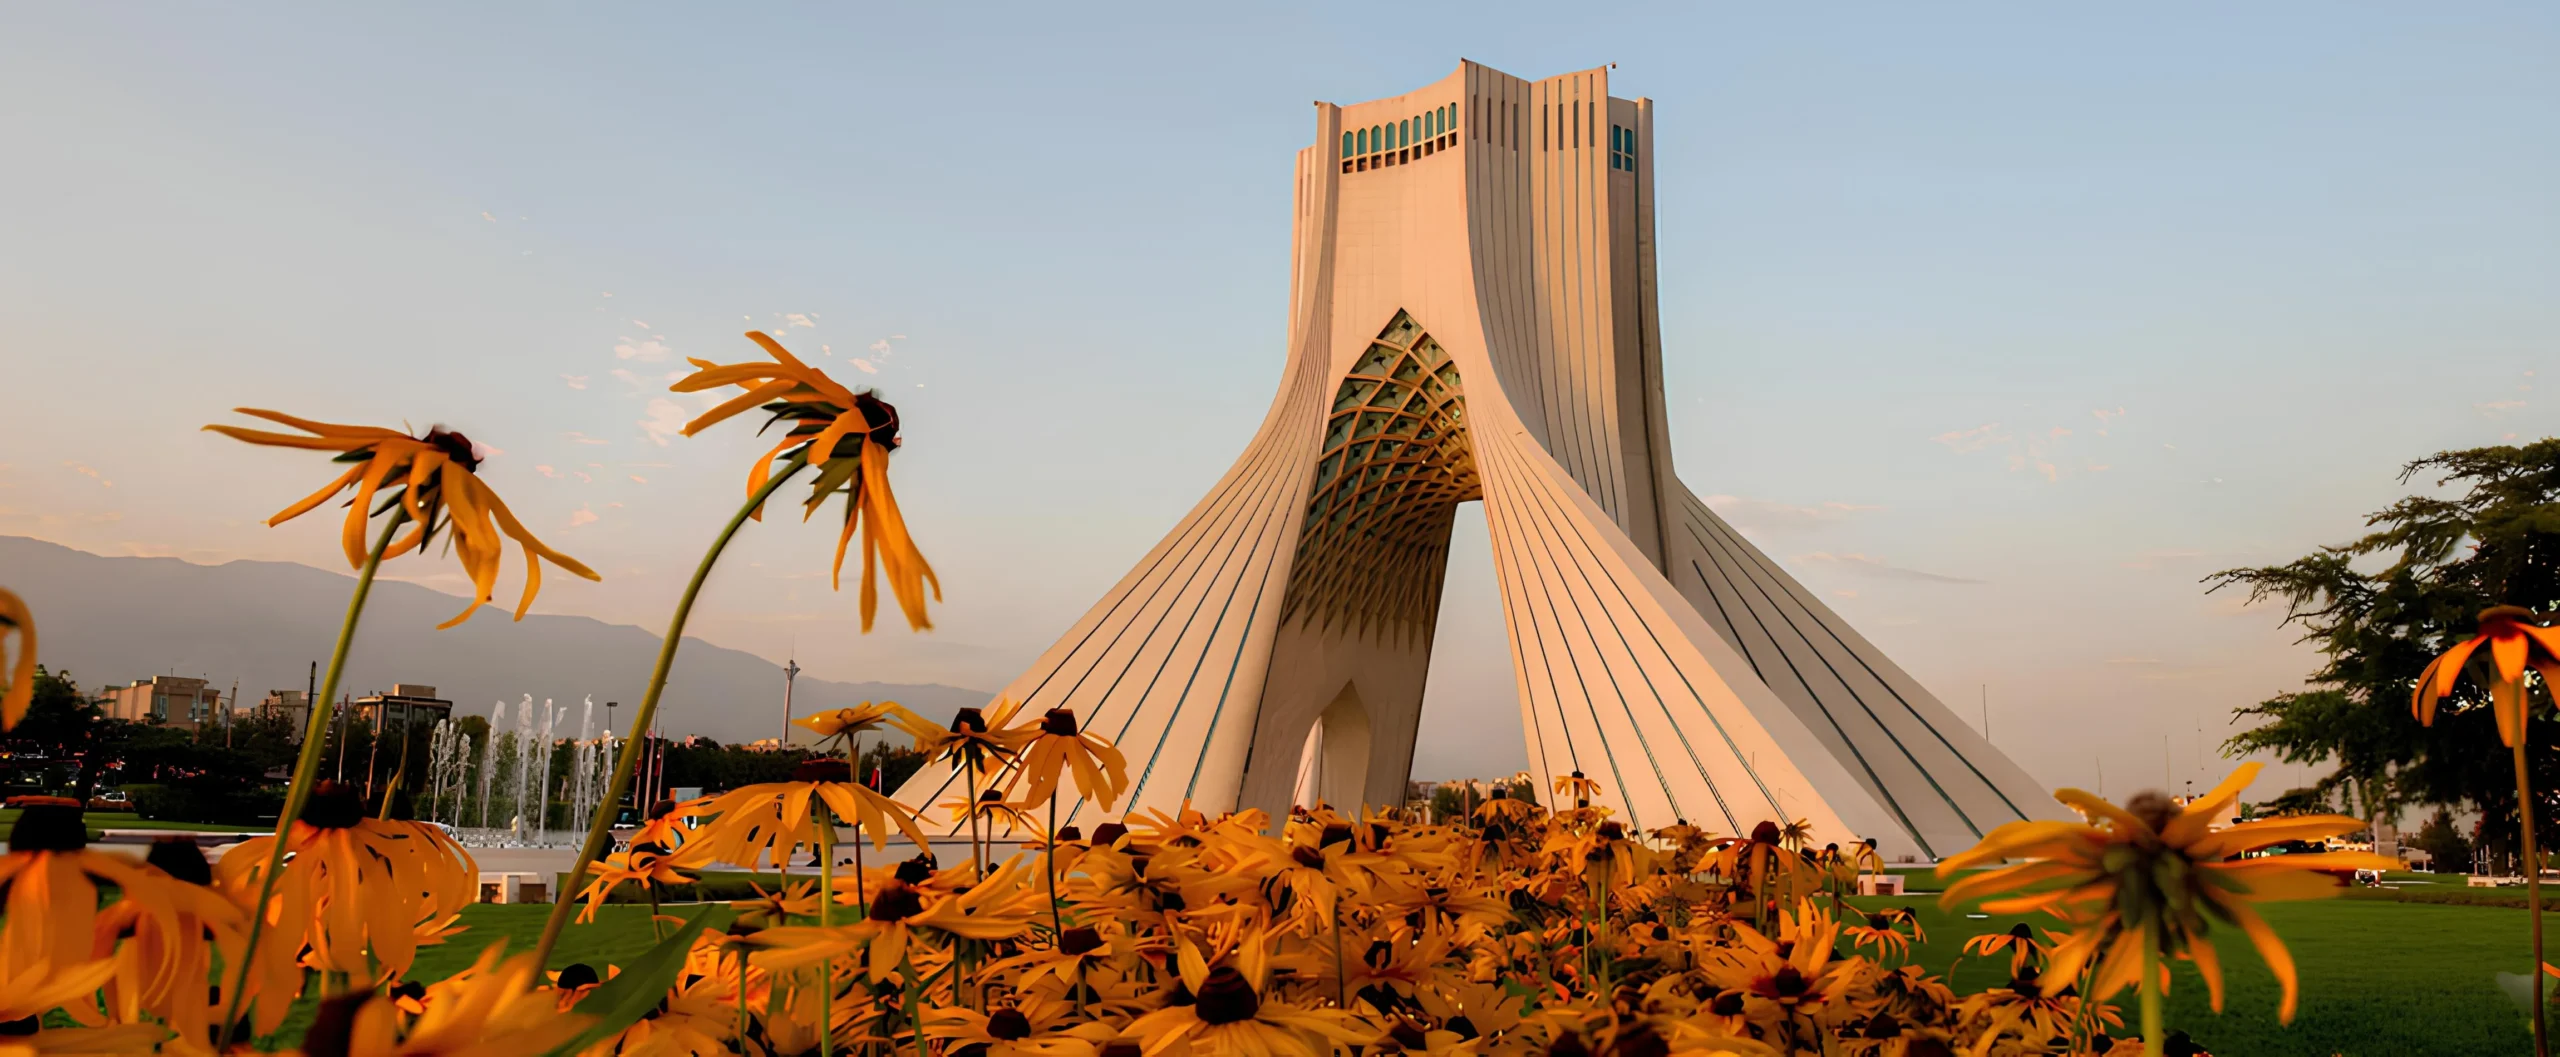 Friendly Cities in Iran (2)